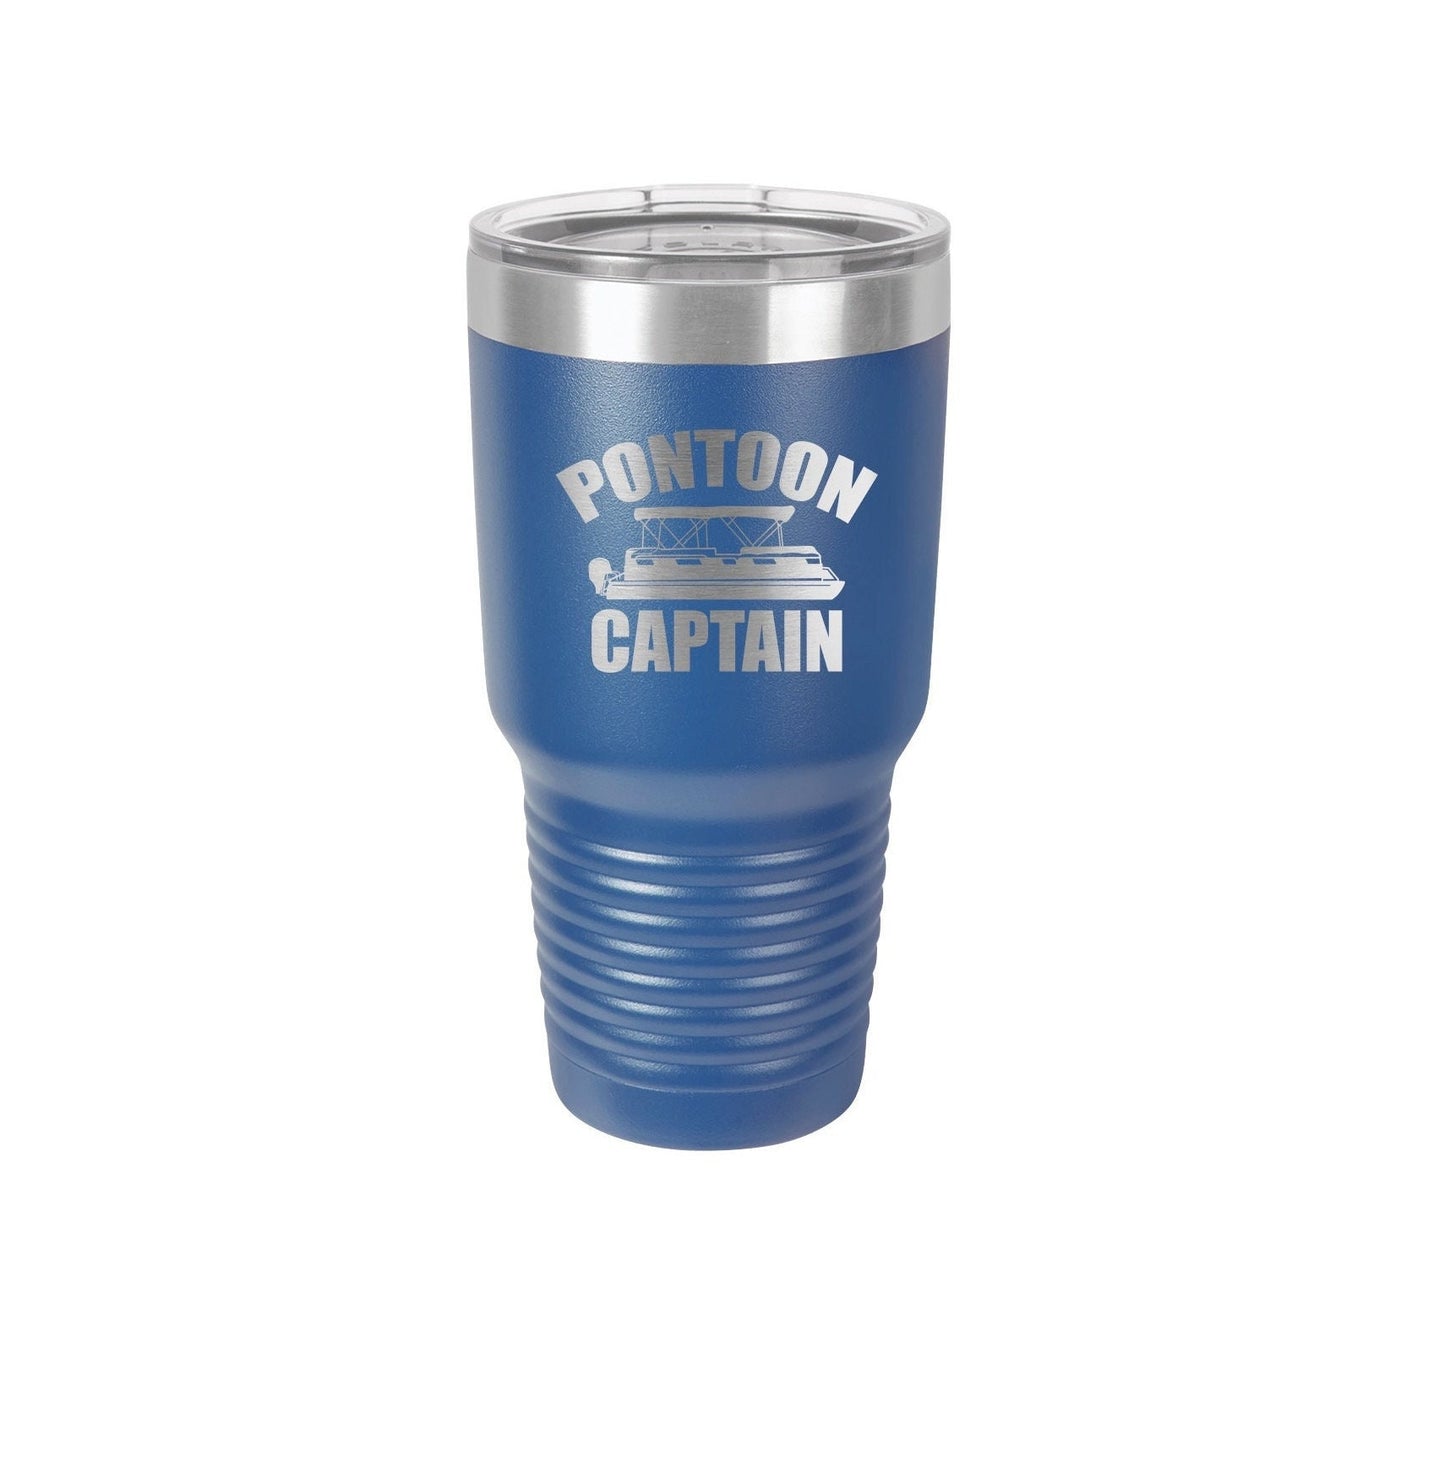 Pontoon Captain Tumbler Boating Tumbler Custom men's tumbler personalized mens gift tumbler personalized gift for father's day 1026